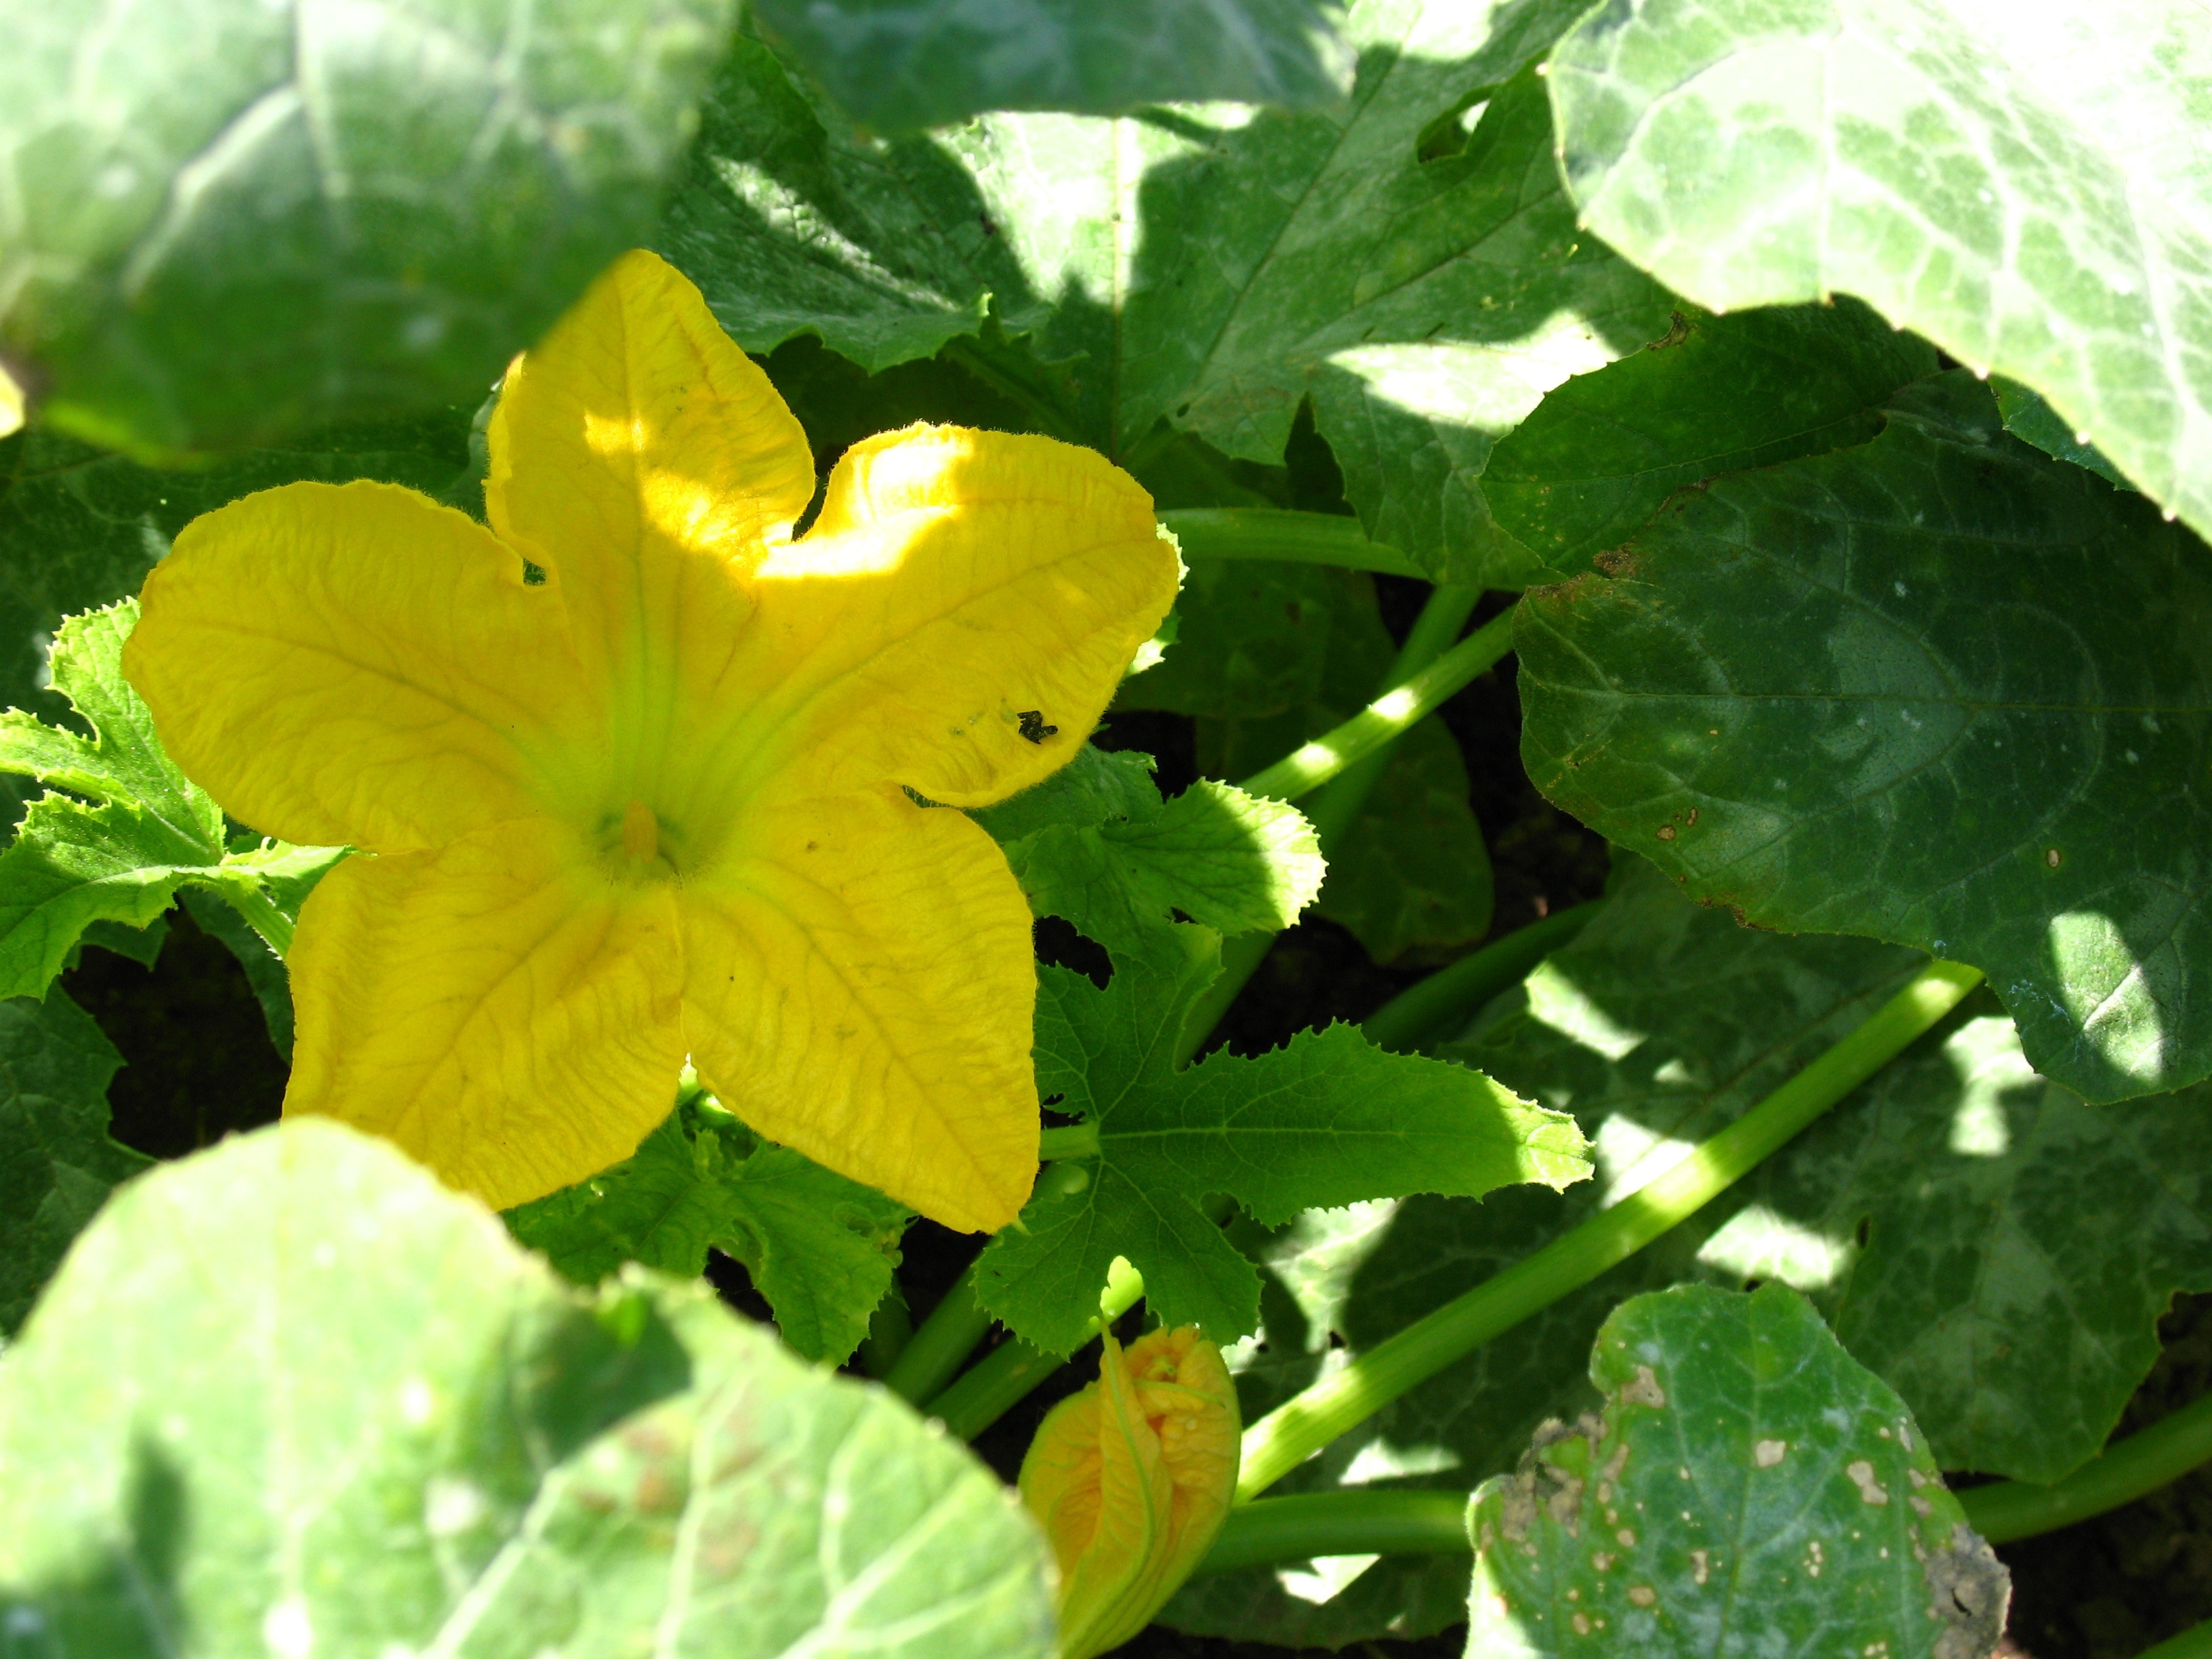 yellow flower near green leaves during daytime